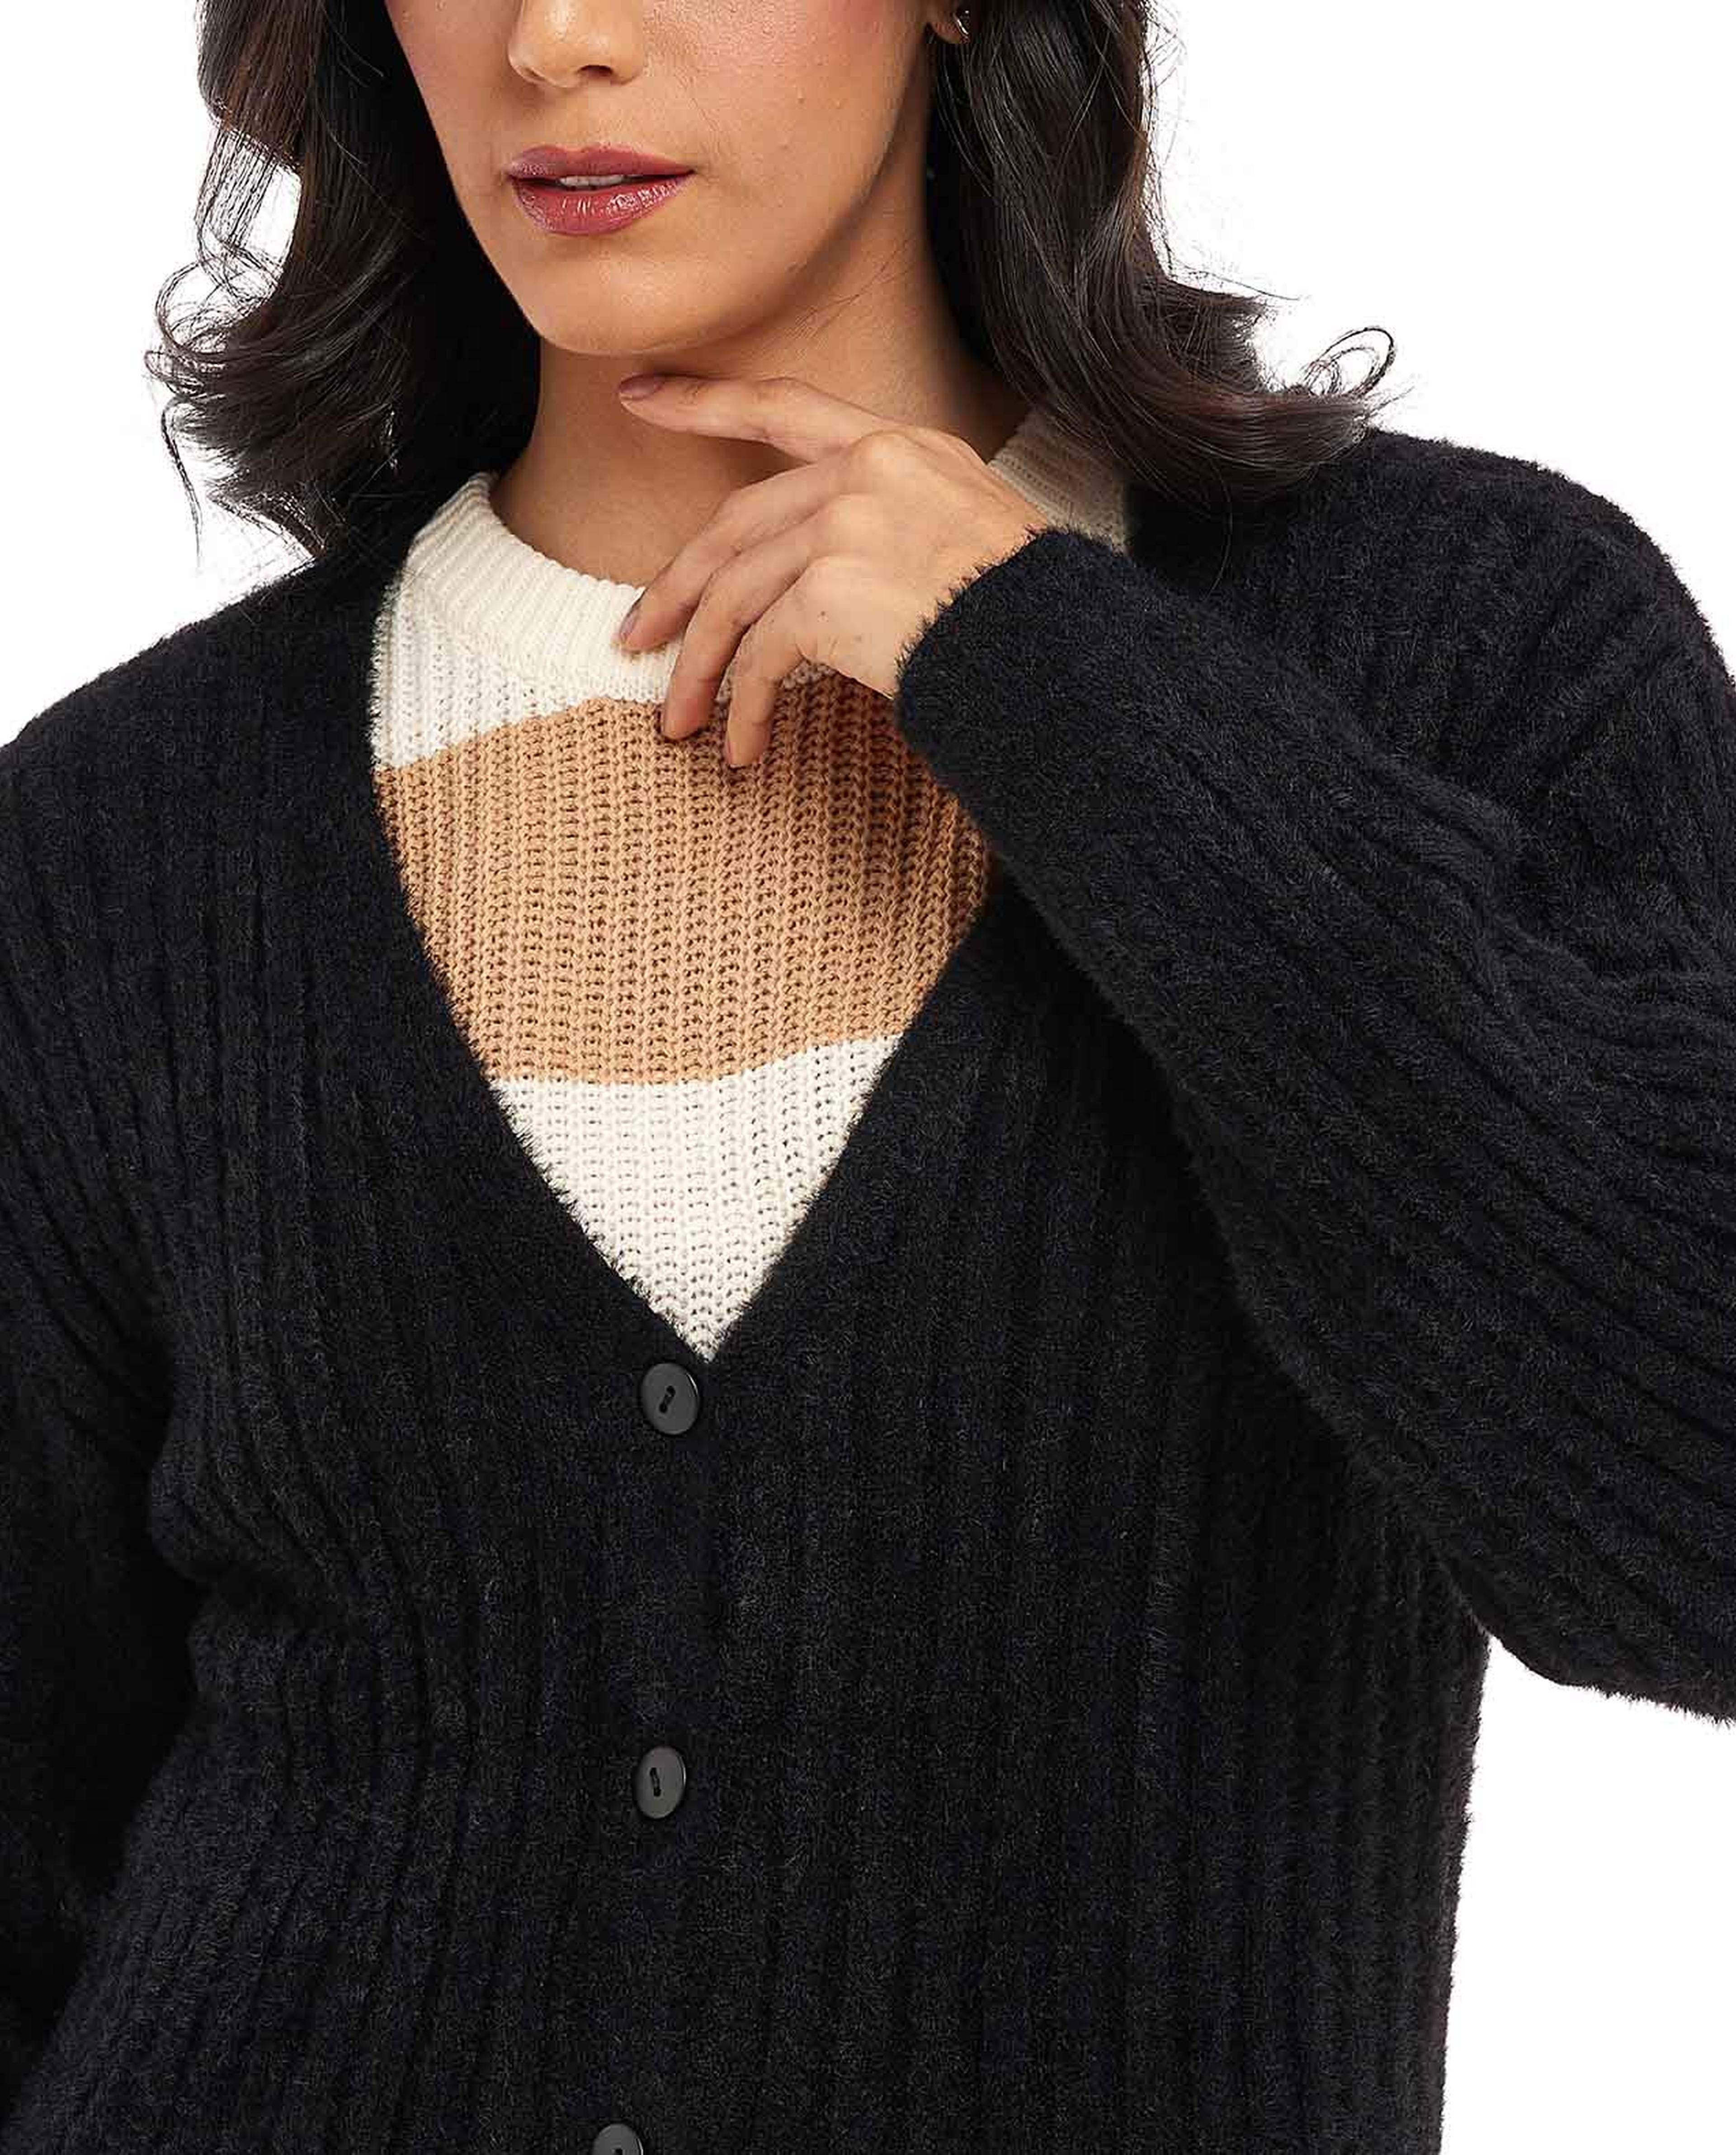 Knitted V-Neck Cardigan with Long Sleeves